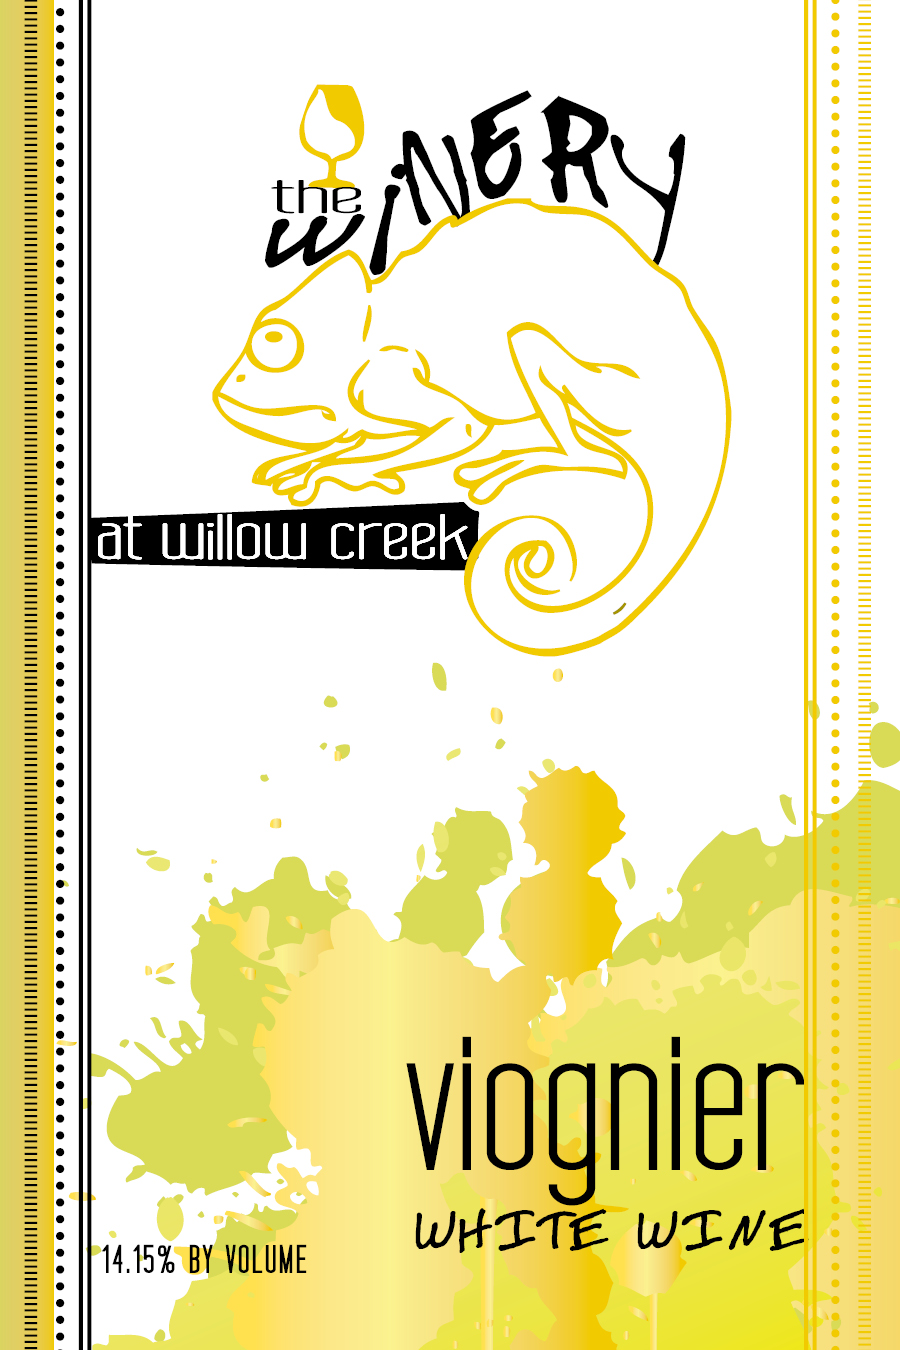 Product Image for Viognier